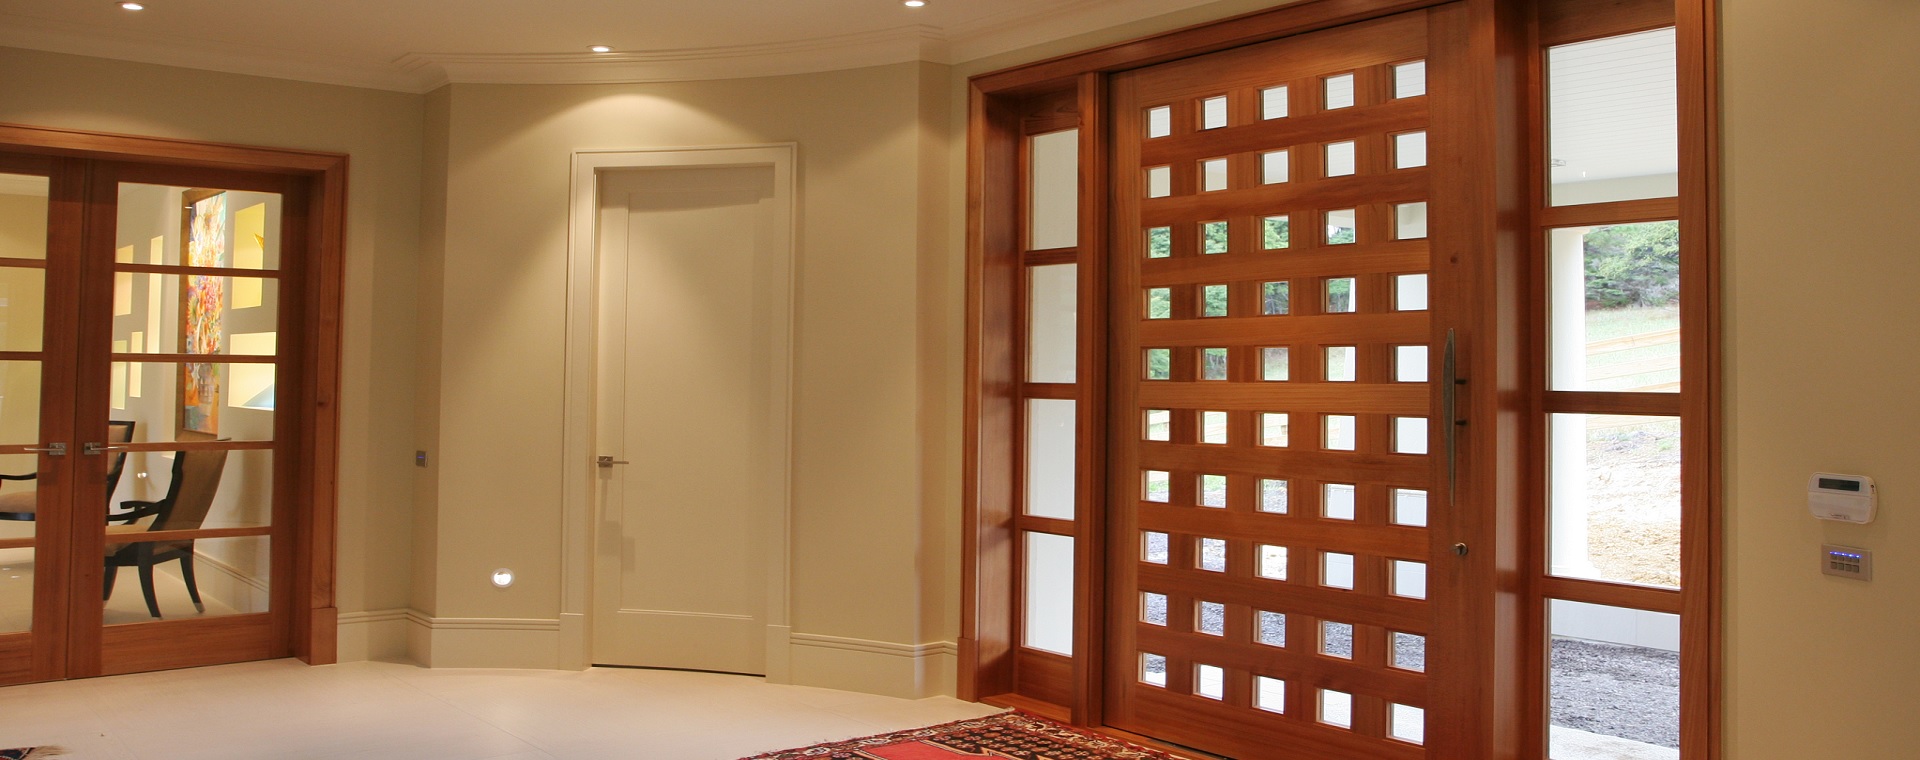 Large entry to a modern home with home automation in-wall touchscreen